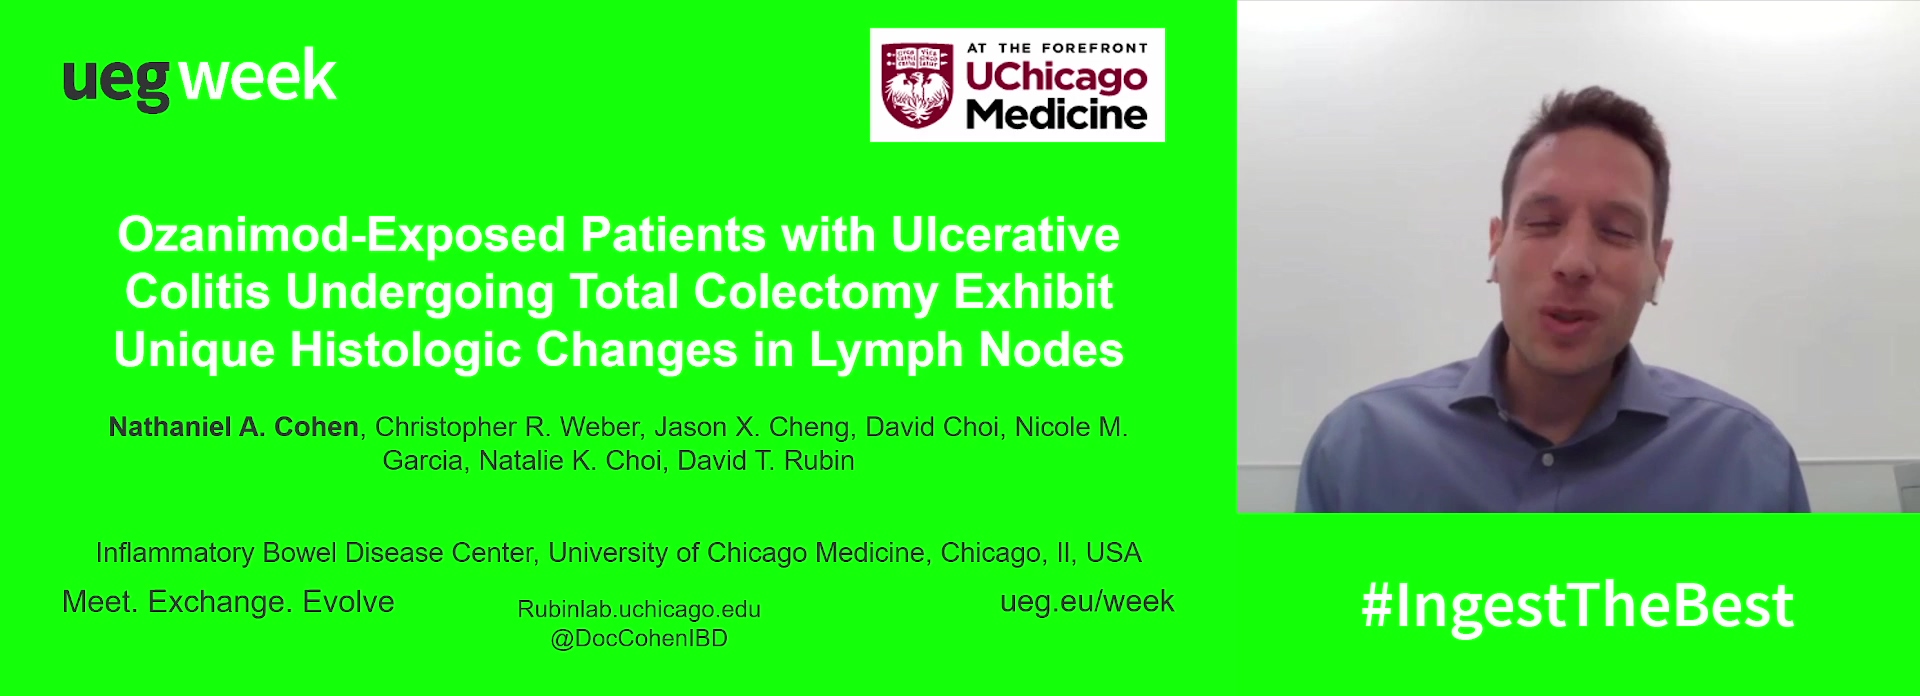 OZANIMOD-EXPOSED PATIENTS WITH ULCERATIVE COLITIS UNDERGOING TOTAL COLECTOMY EXHIBIT UNIQUE HISTOLOGIC CHANGES IN LYMPH NODES